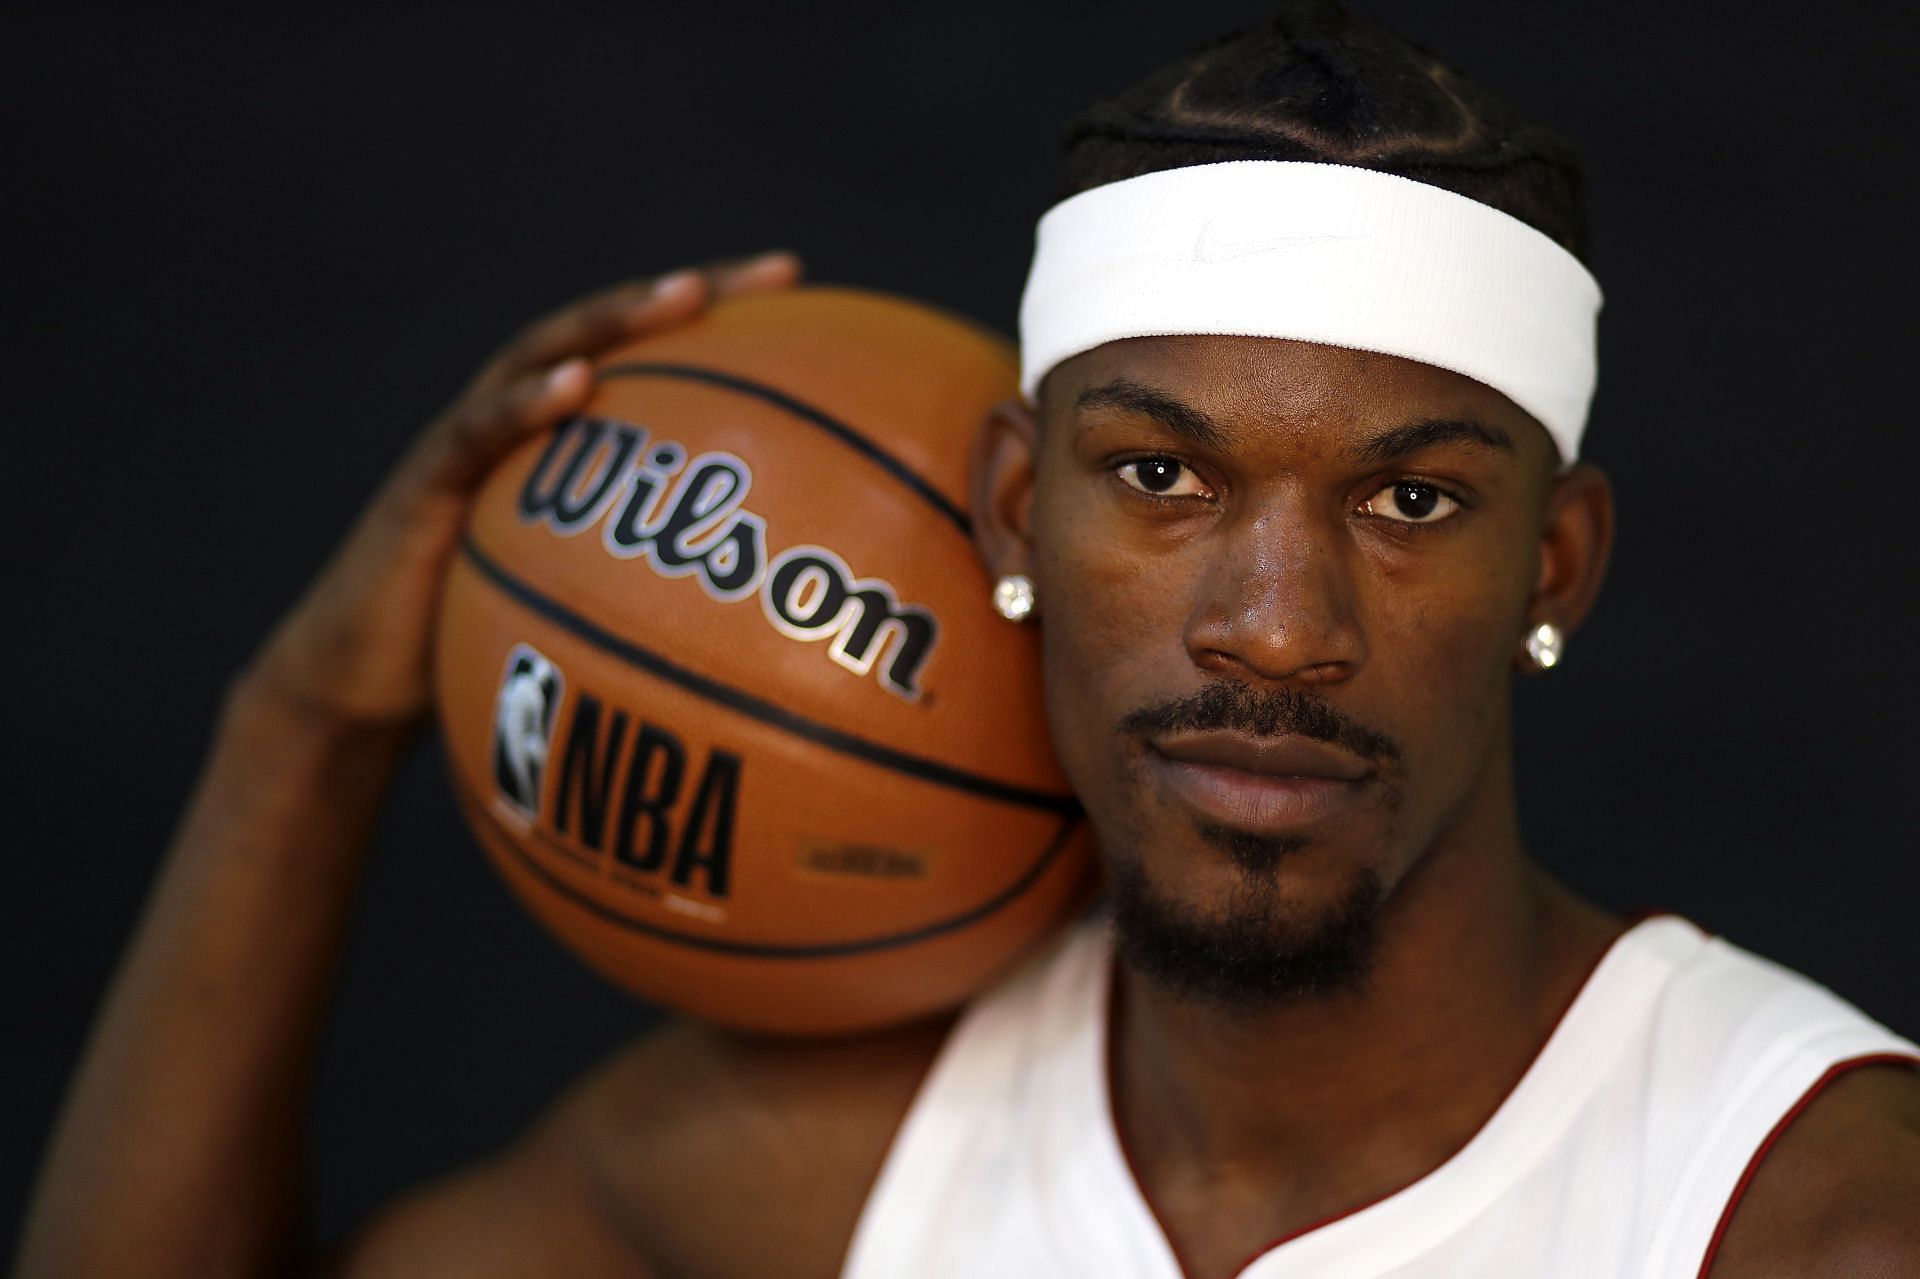 Jimmy Butler #22 of the Miami Heat poses for a photo during Media Day at FTX Arena on September 27, 2021 in Miami, Florida.